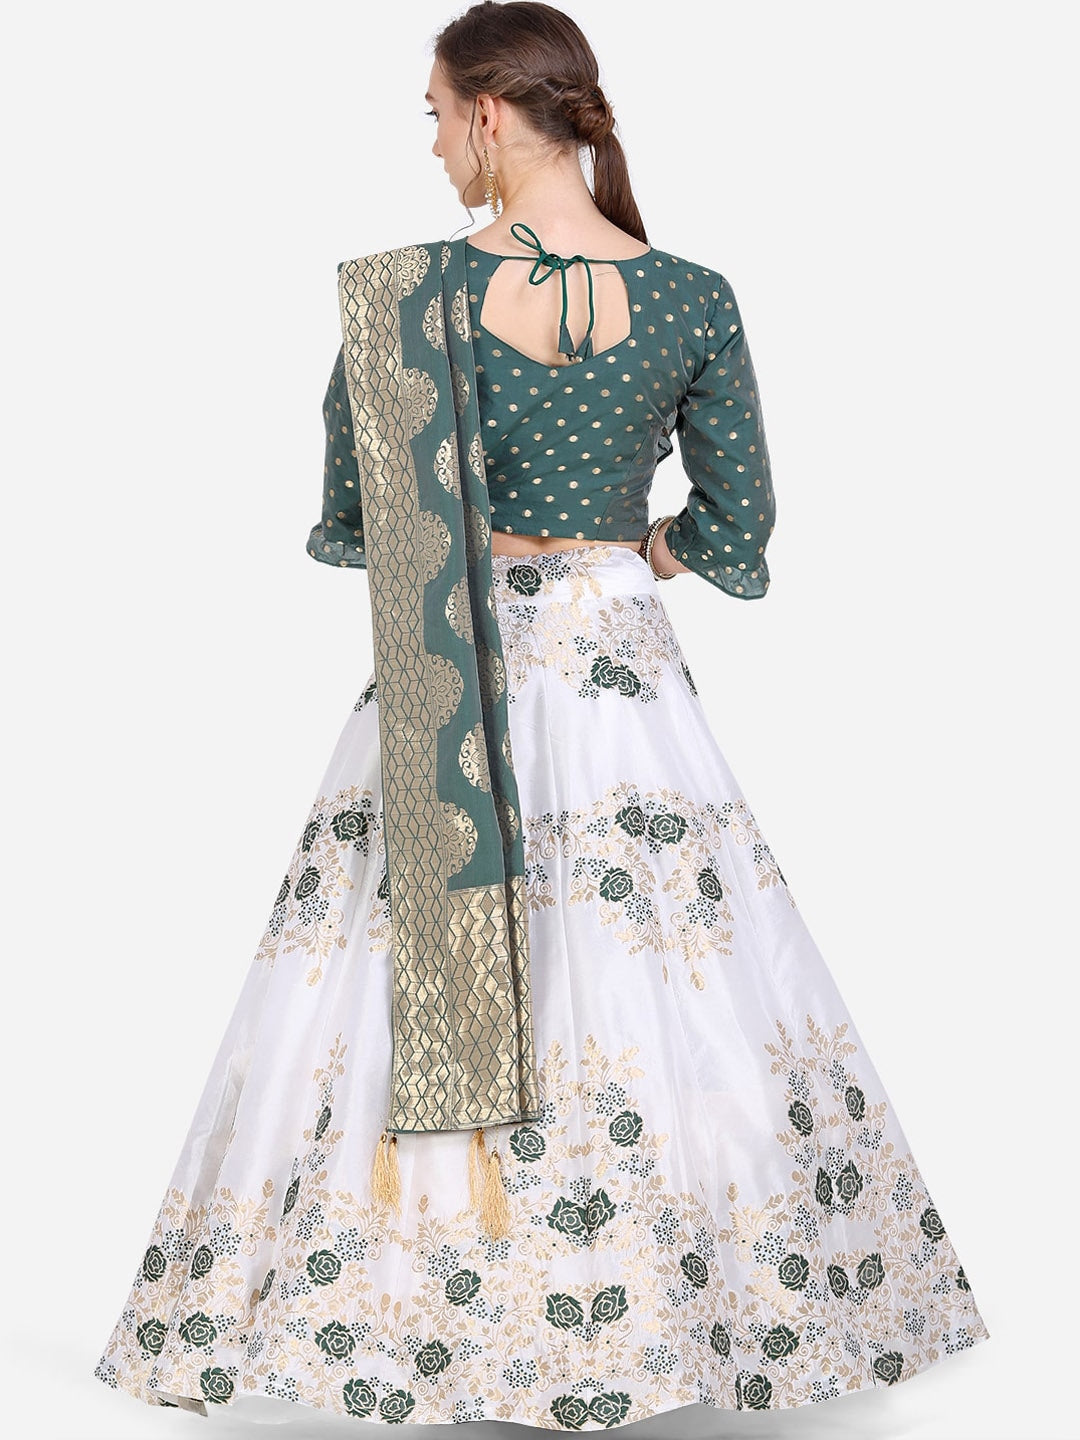 Green Printed Lehenga Set - Indian Clothing in Denver, CO, Aurora, CO, Boulder, CO, Fort Collins, CO, Colorado Springs, CO, Parker, CO, Highlands Ranch, CO, Cherry Creek, CO, Centennial, CO, and Longmont, CO. Nationwide shipping USA - India Fashion X